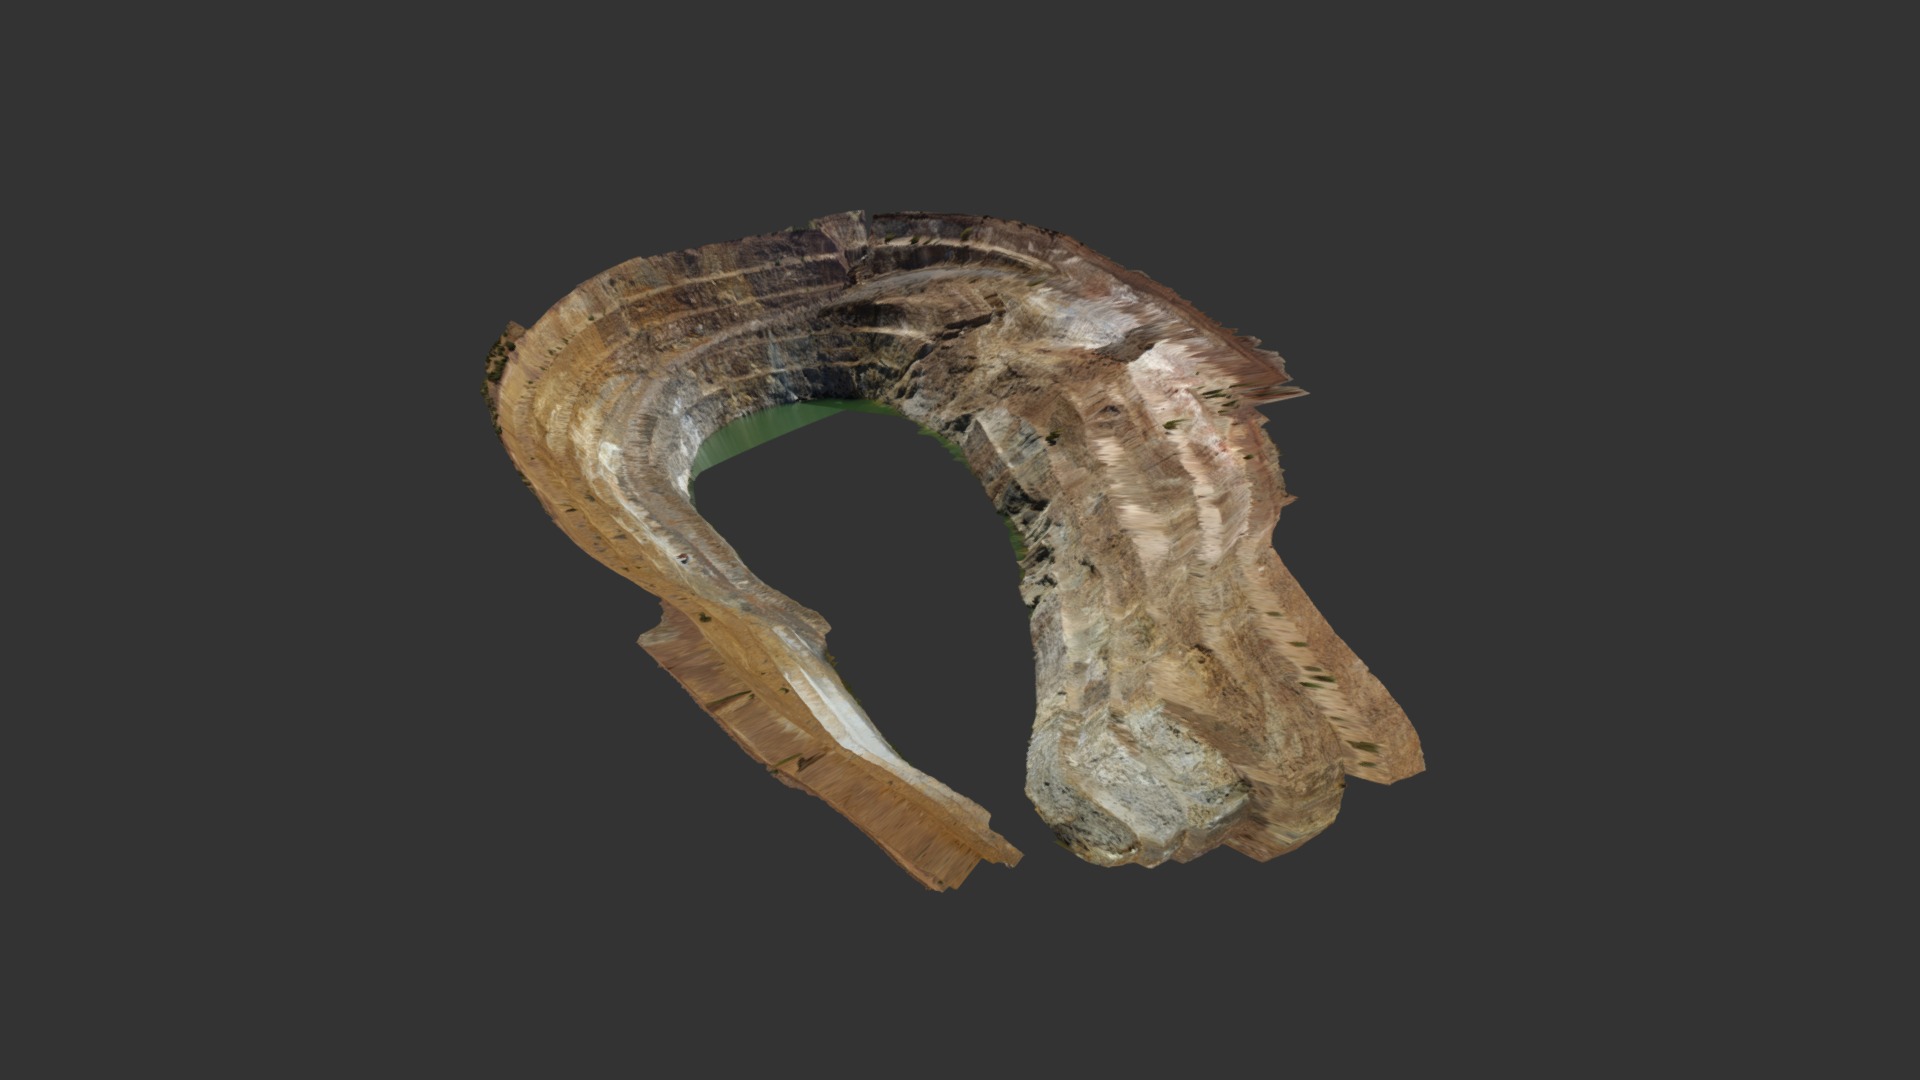 3D model Forrestania Mine - This is a 3D model of the Forrestania Mine. The 3D model is about a close-up of a snake.